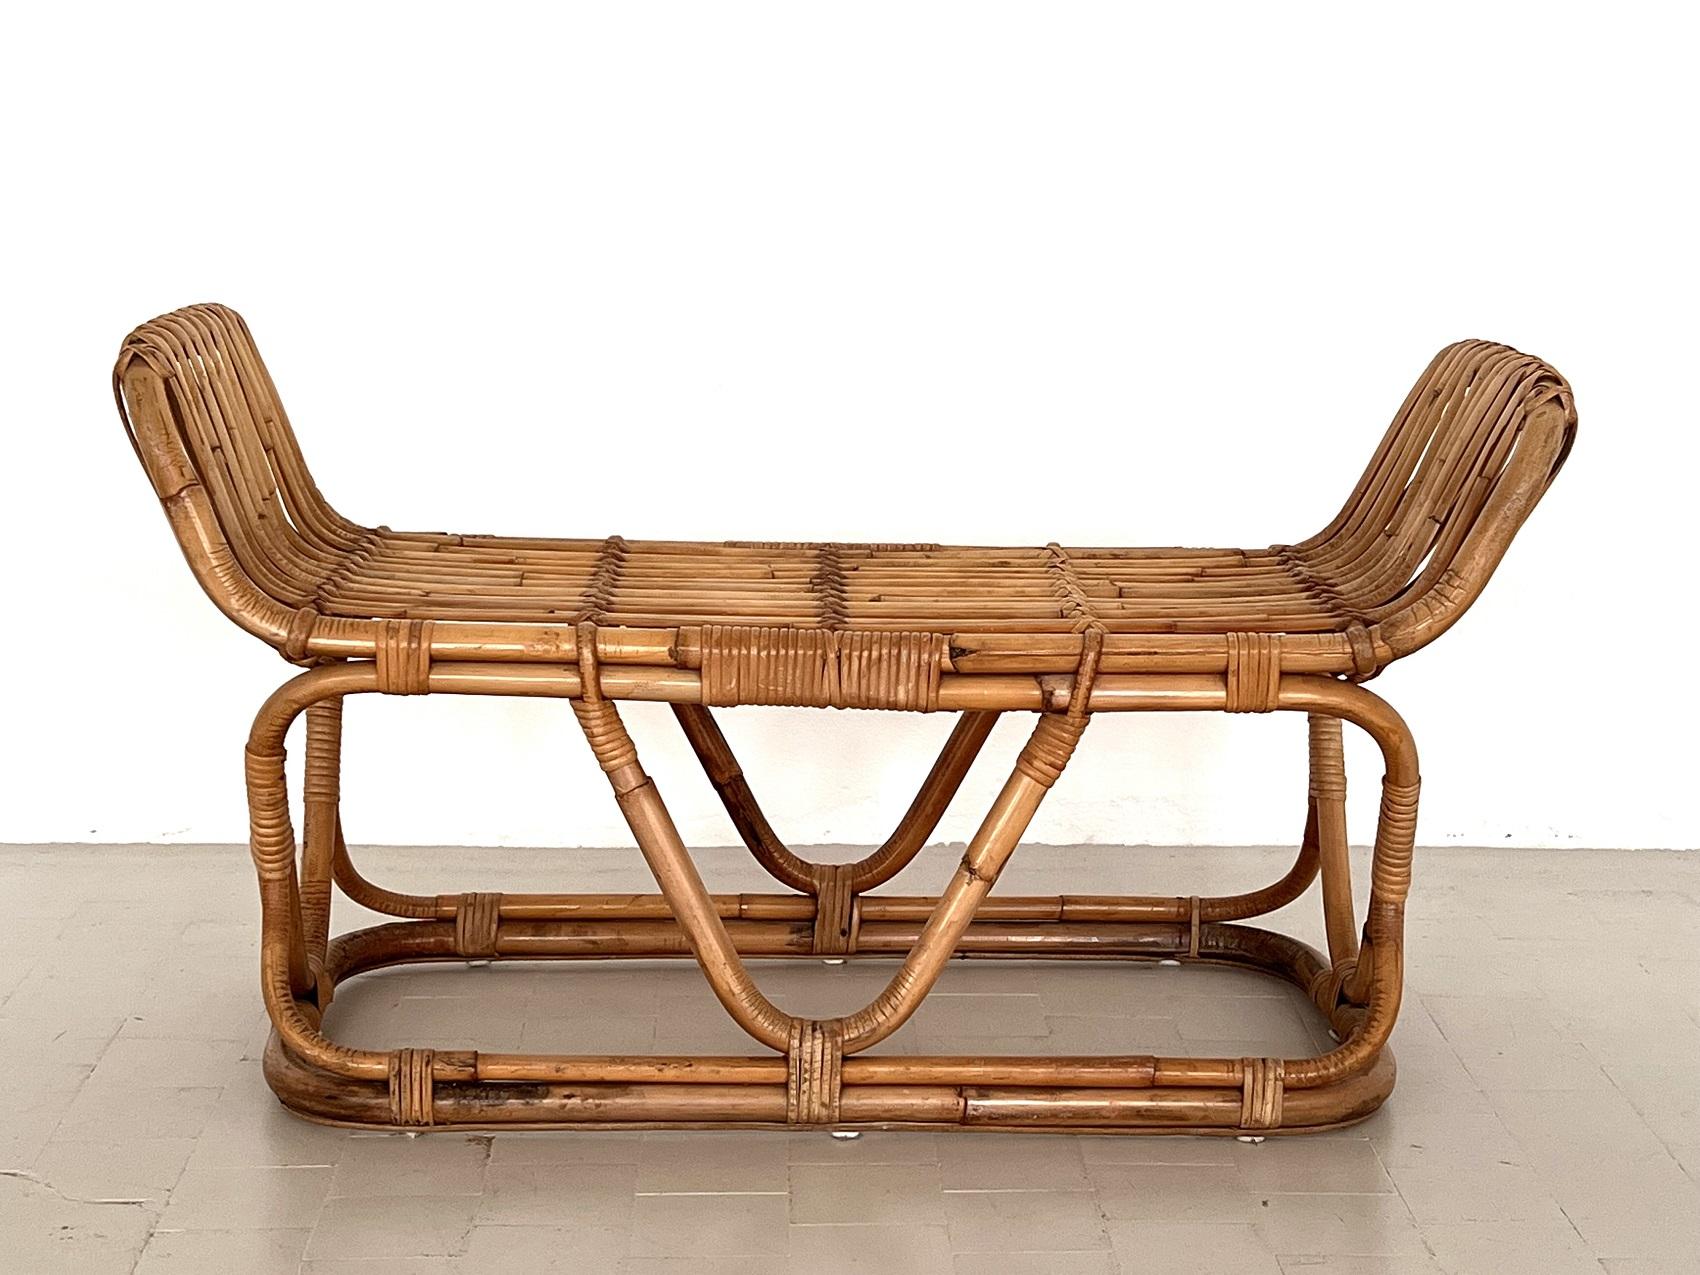 Beautiful bench completely made of organic bamboo-rattan, or can also be used as a shelf.
Excellent, clean and dry vintage condition, without defects. Strong and stable.
Attributed to Tito Agnoli, made in Italy in the 1970s.